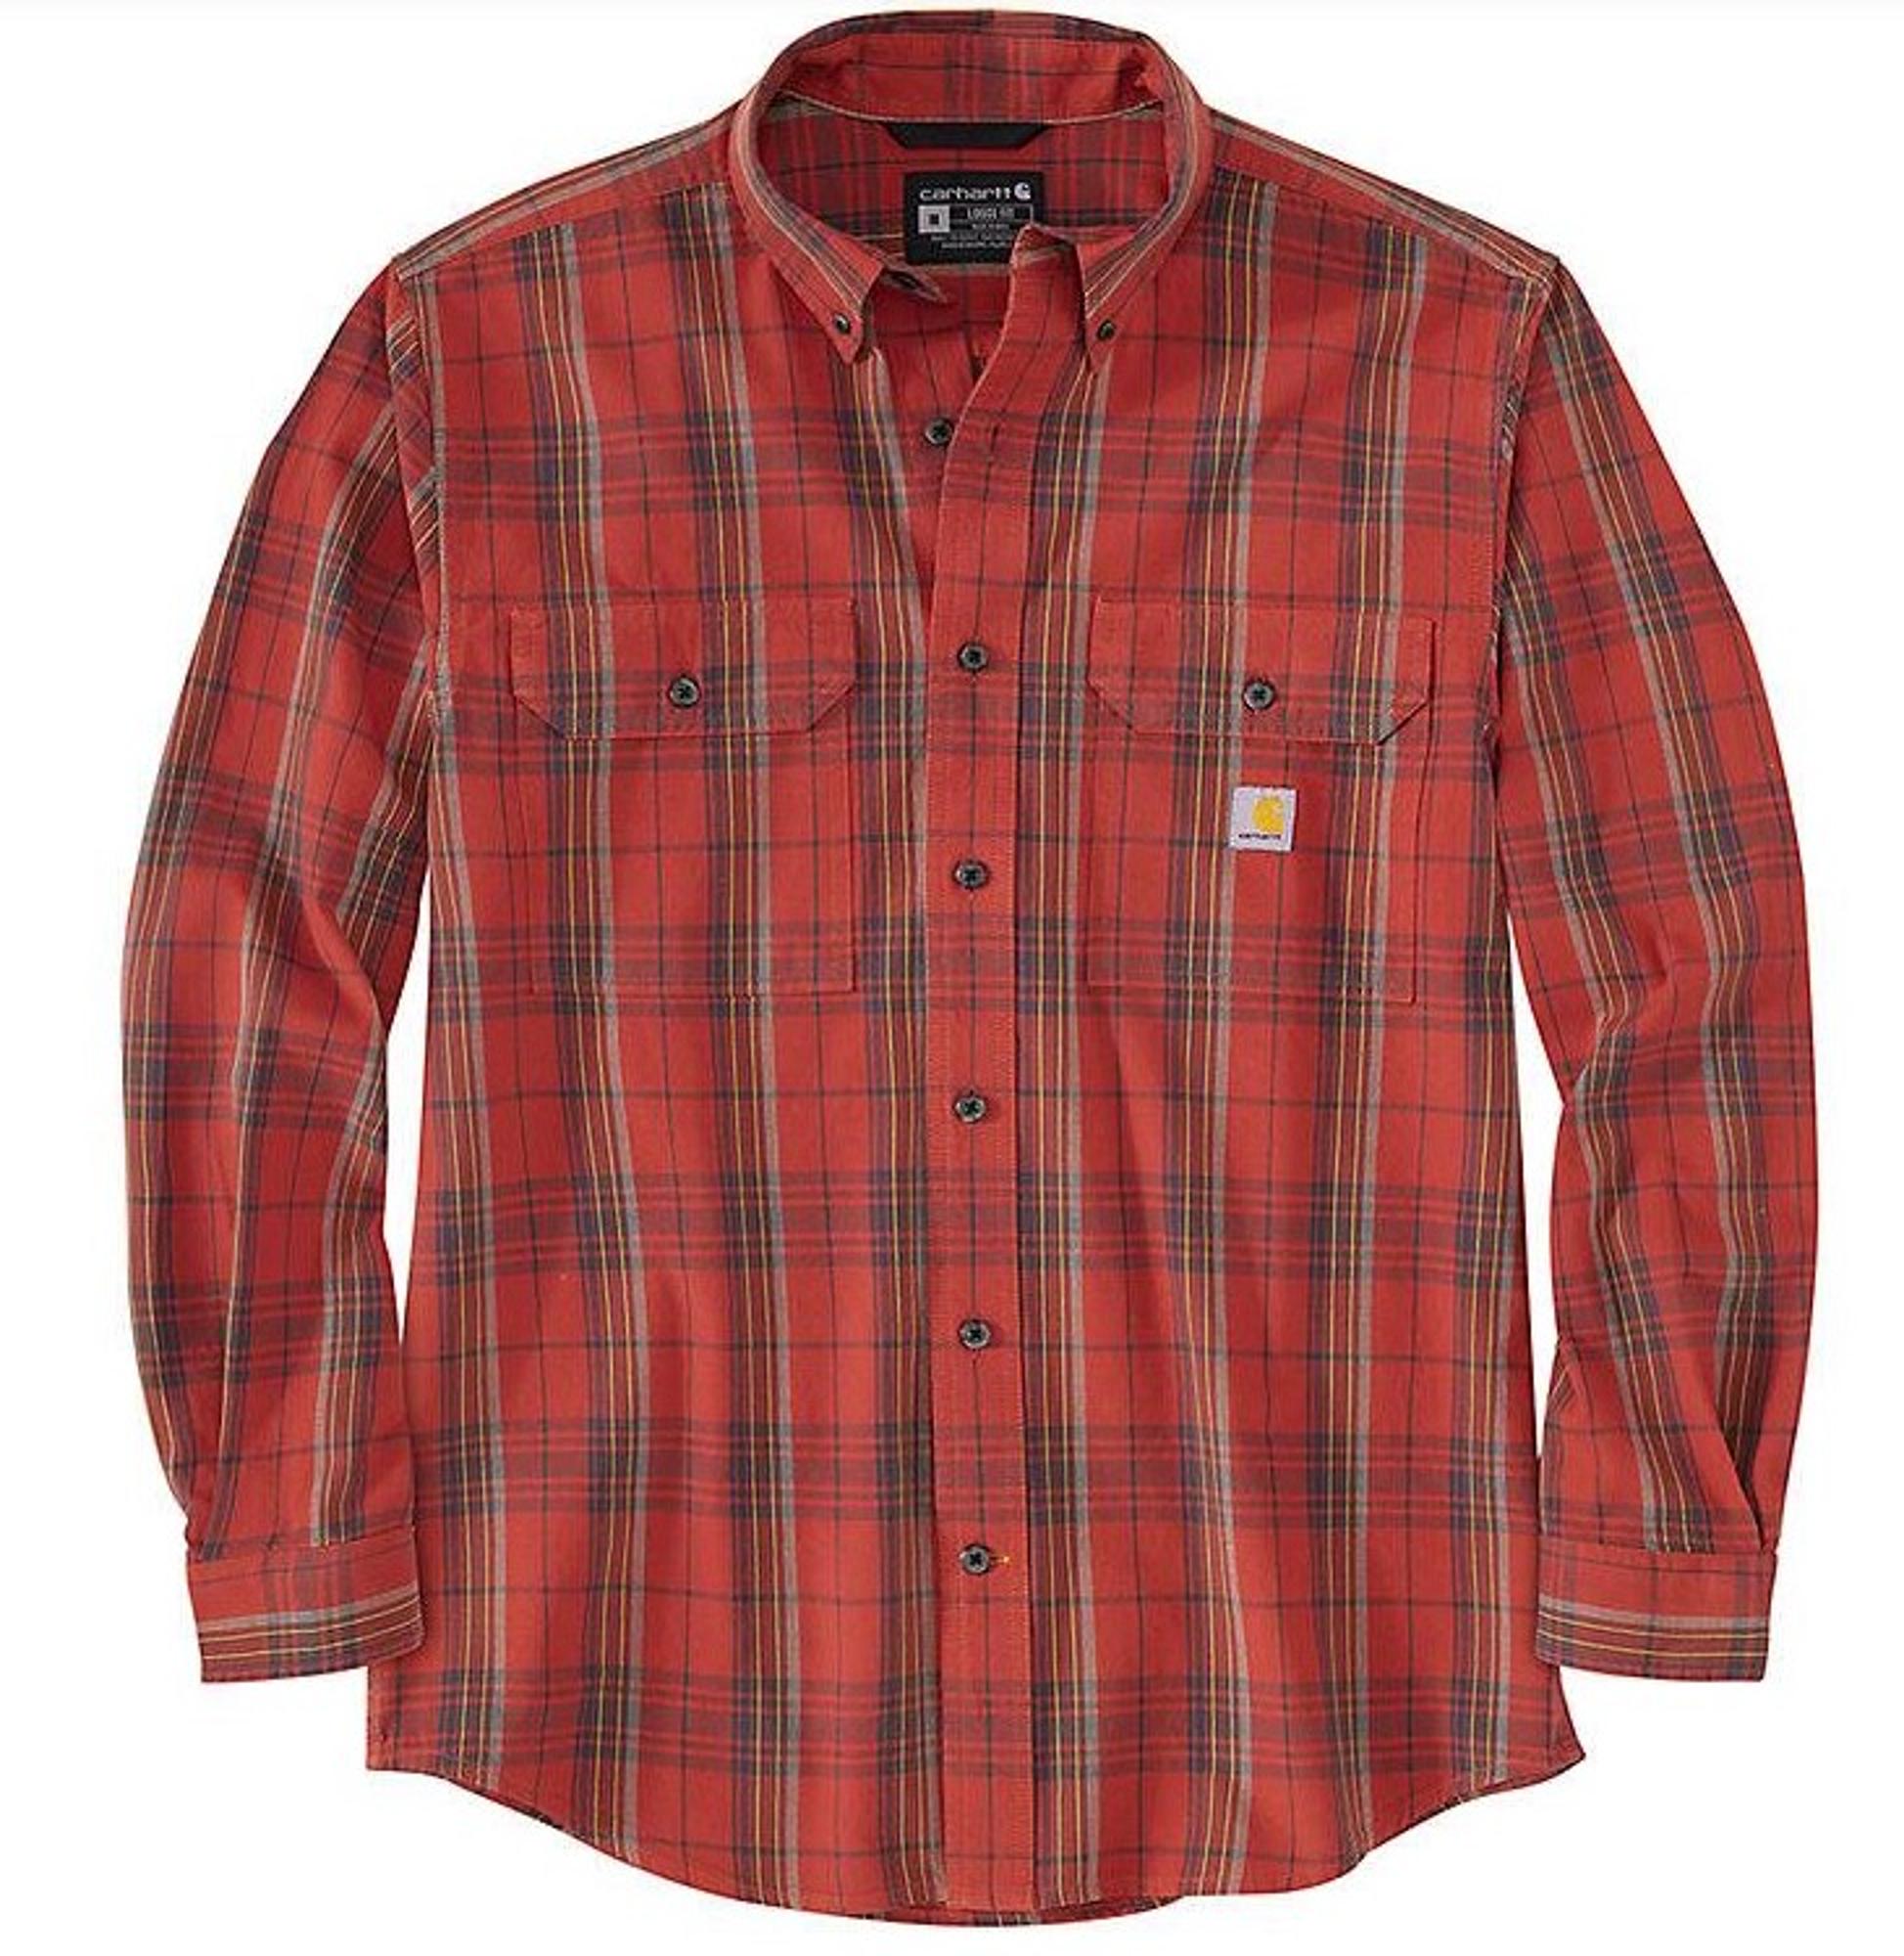 Loose Fit Midweight Chambray Long Sleeve Plaid Shirt